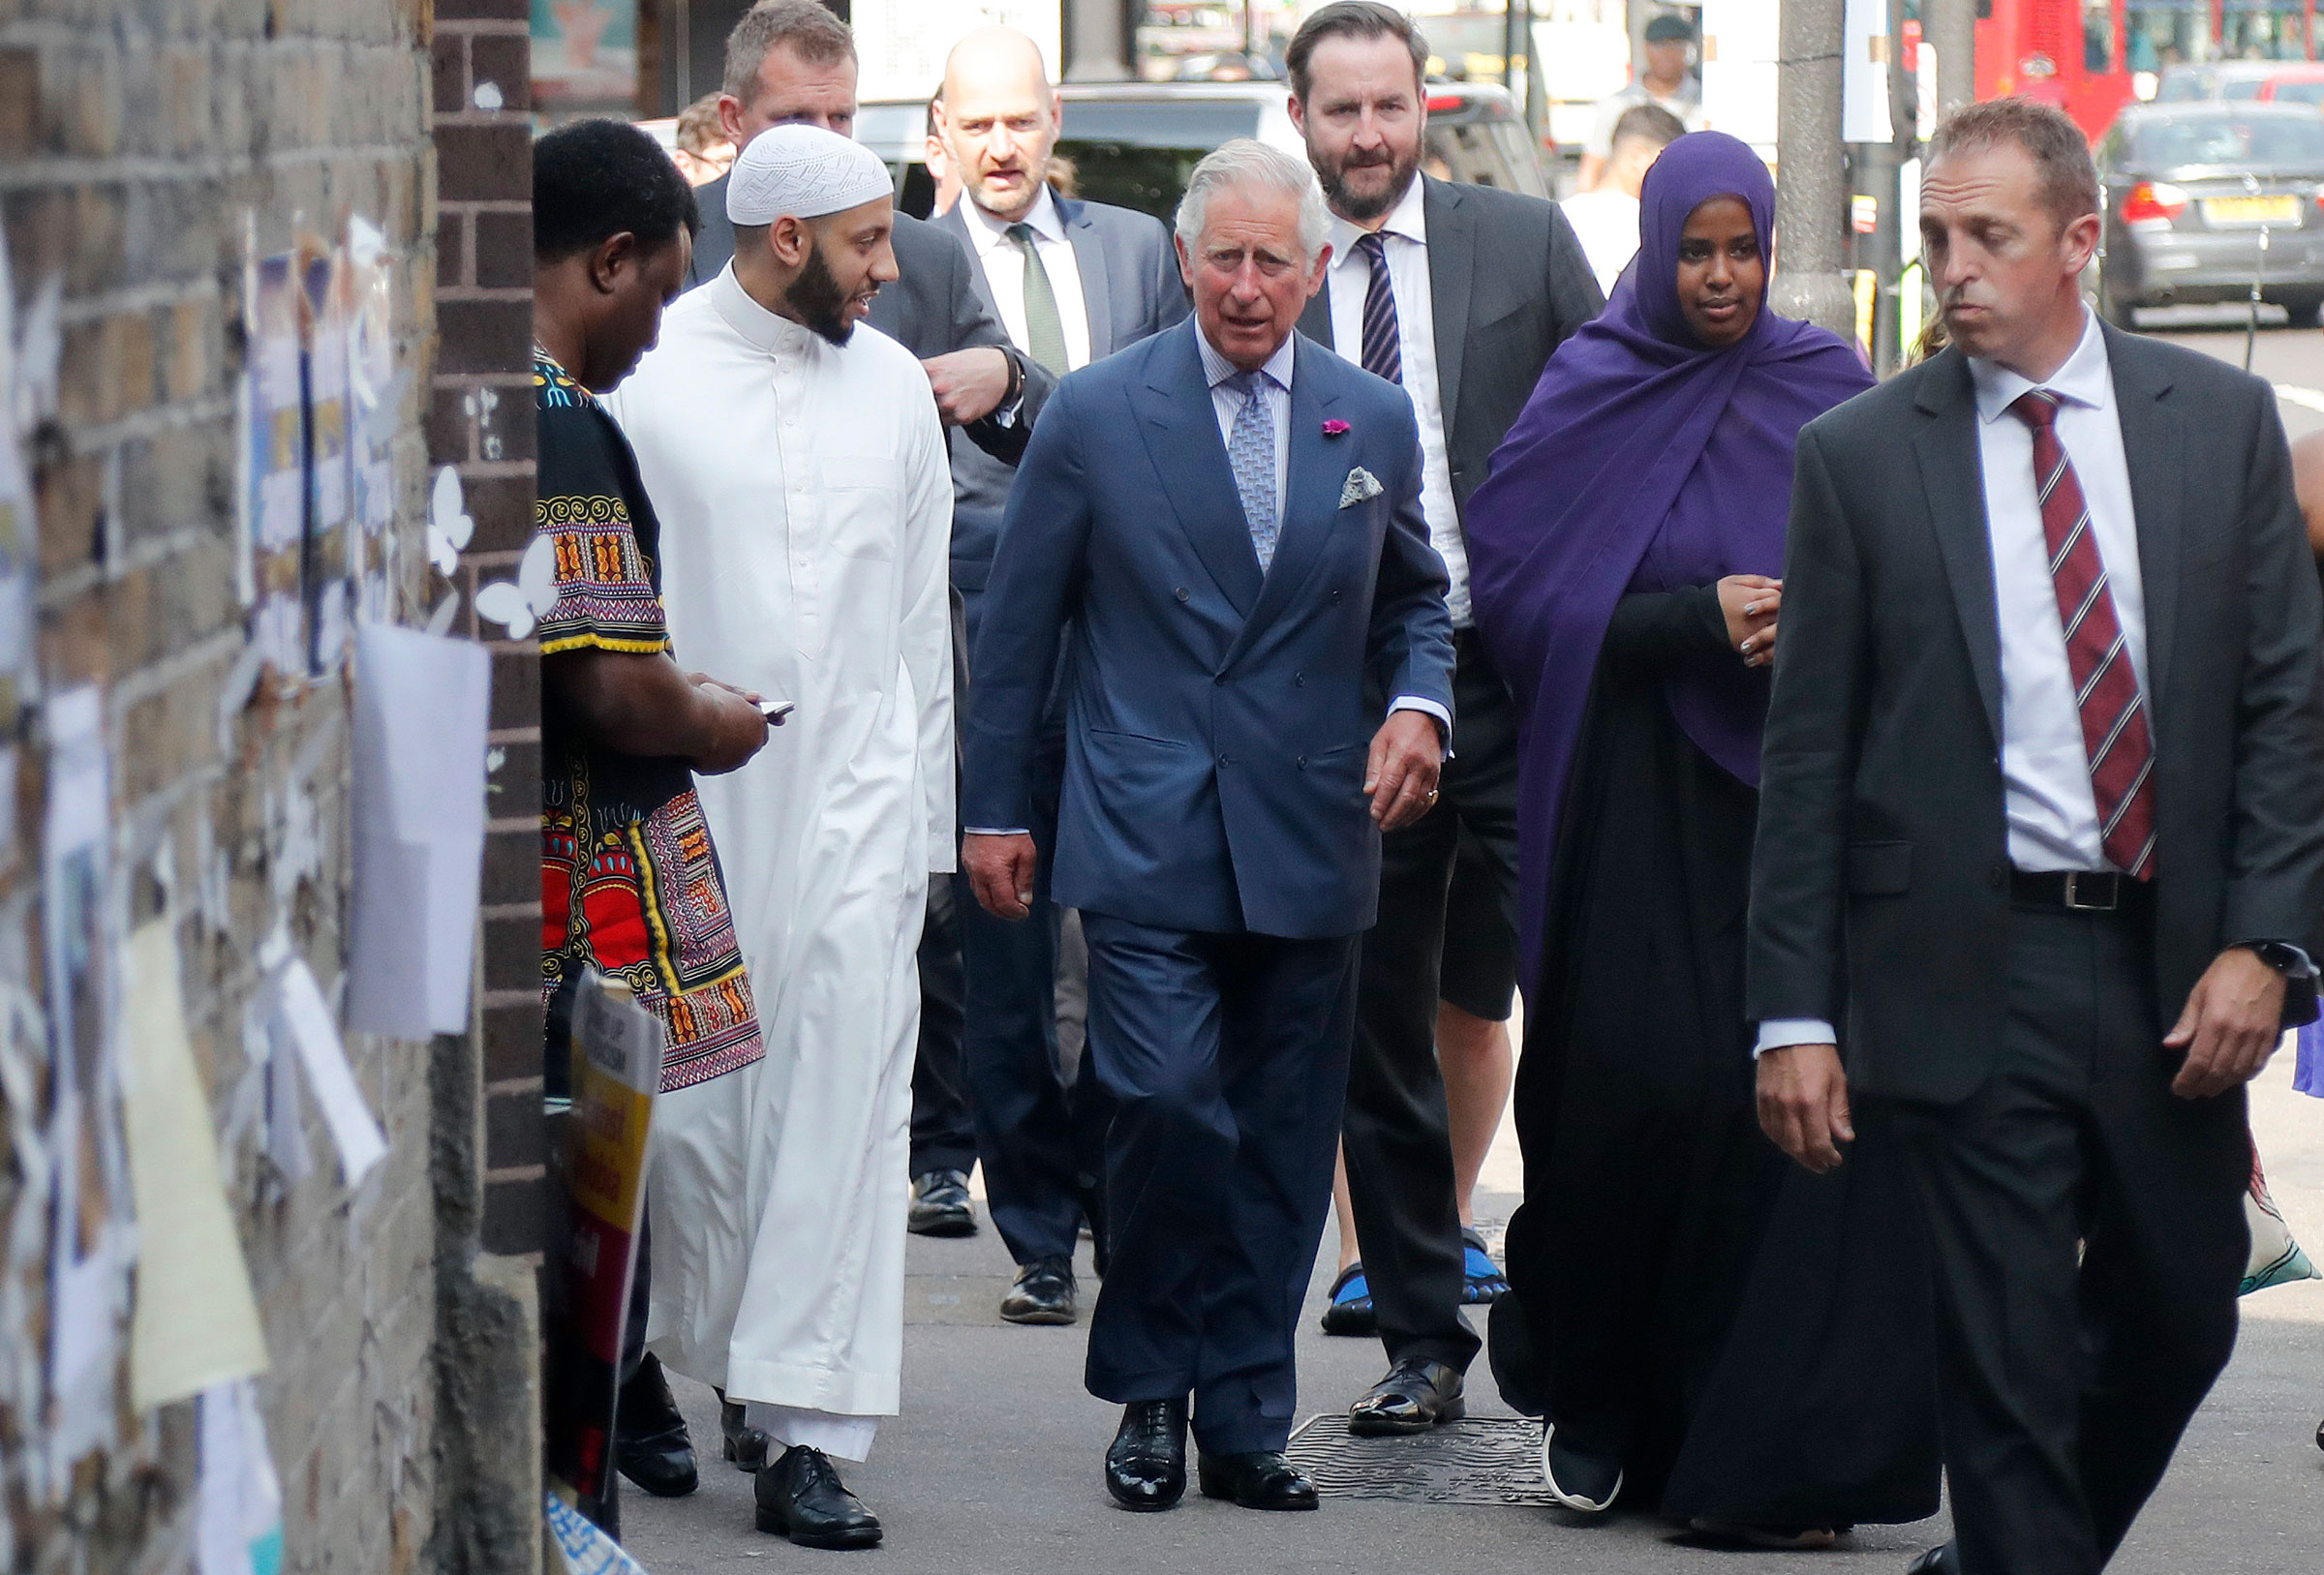 King Charles III, center, speaks to Muslim leader Mohammed Mahmoud as he visits the Muslim Welfare House, Finsbury Park, to meet members of the local community and hear about the community response following the recent extremist attacks in London, on June 21, 2017. (Frank Augstein—AP)